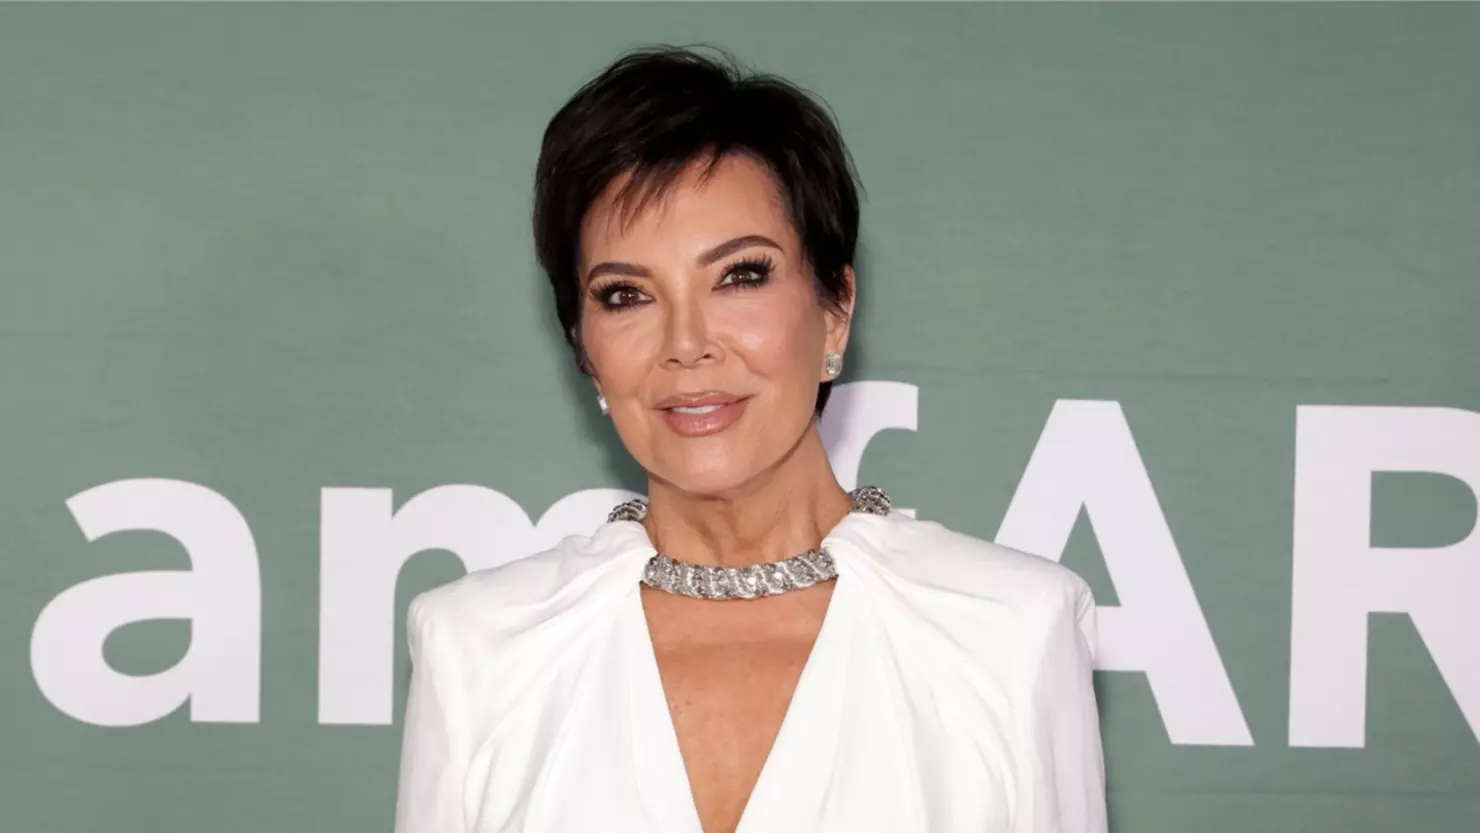 kris-jenner-disclosed-her-health-scare-during-the-trailer-of-the-kardashians-season-5